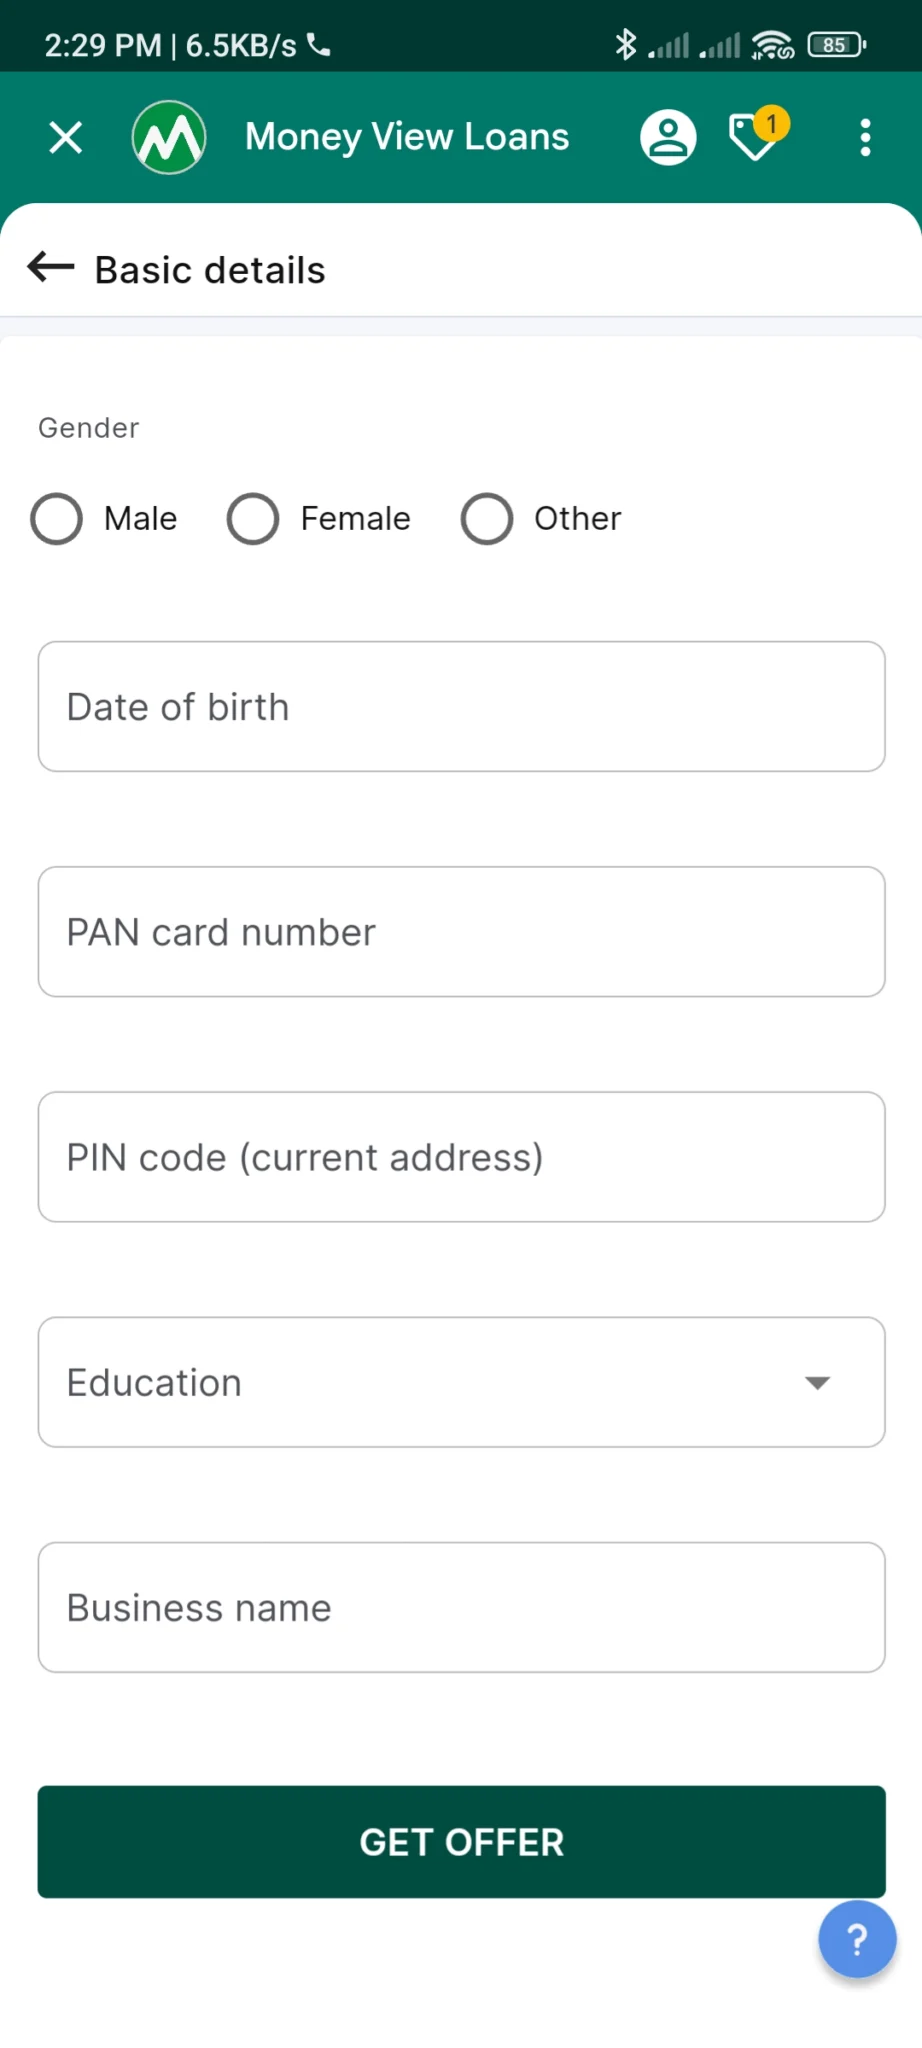 5 Now enter your gender, pan details and address